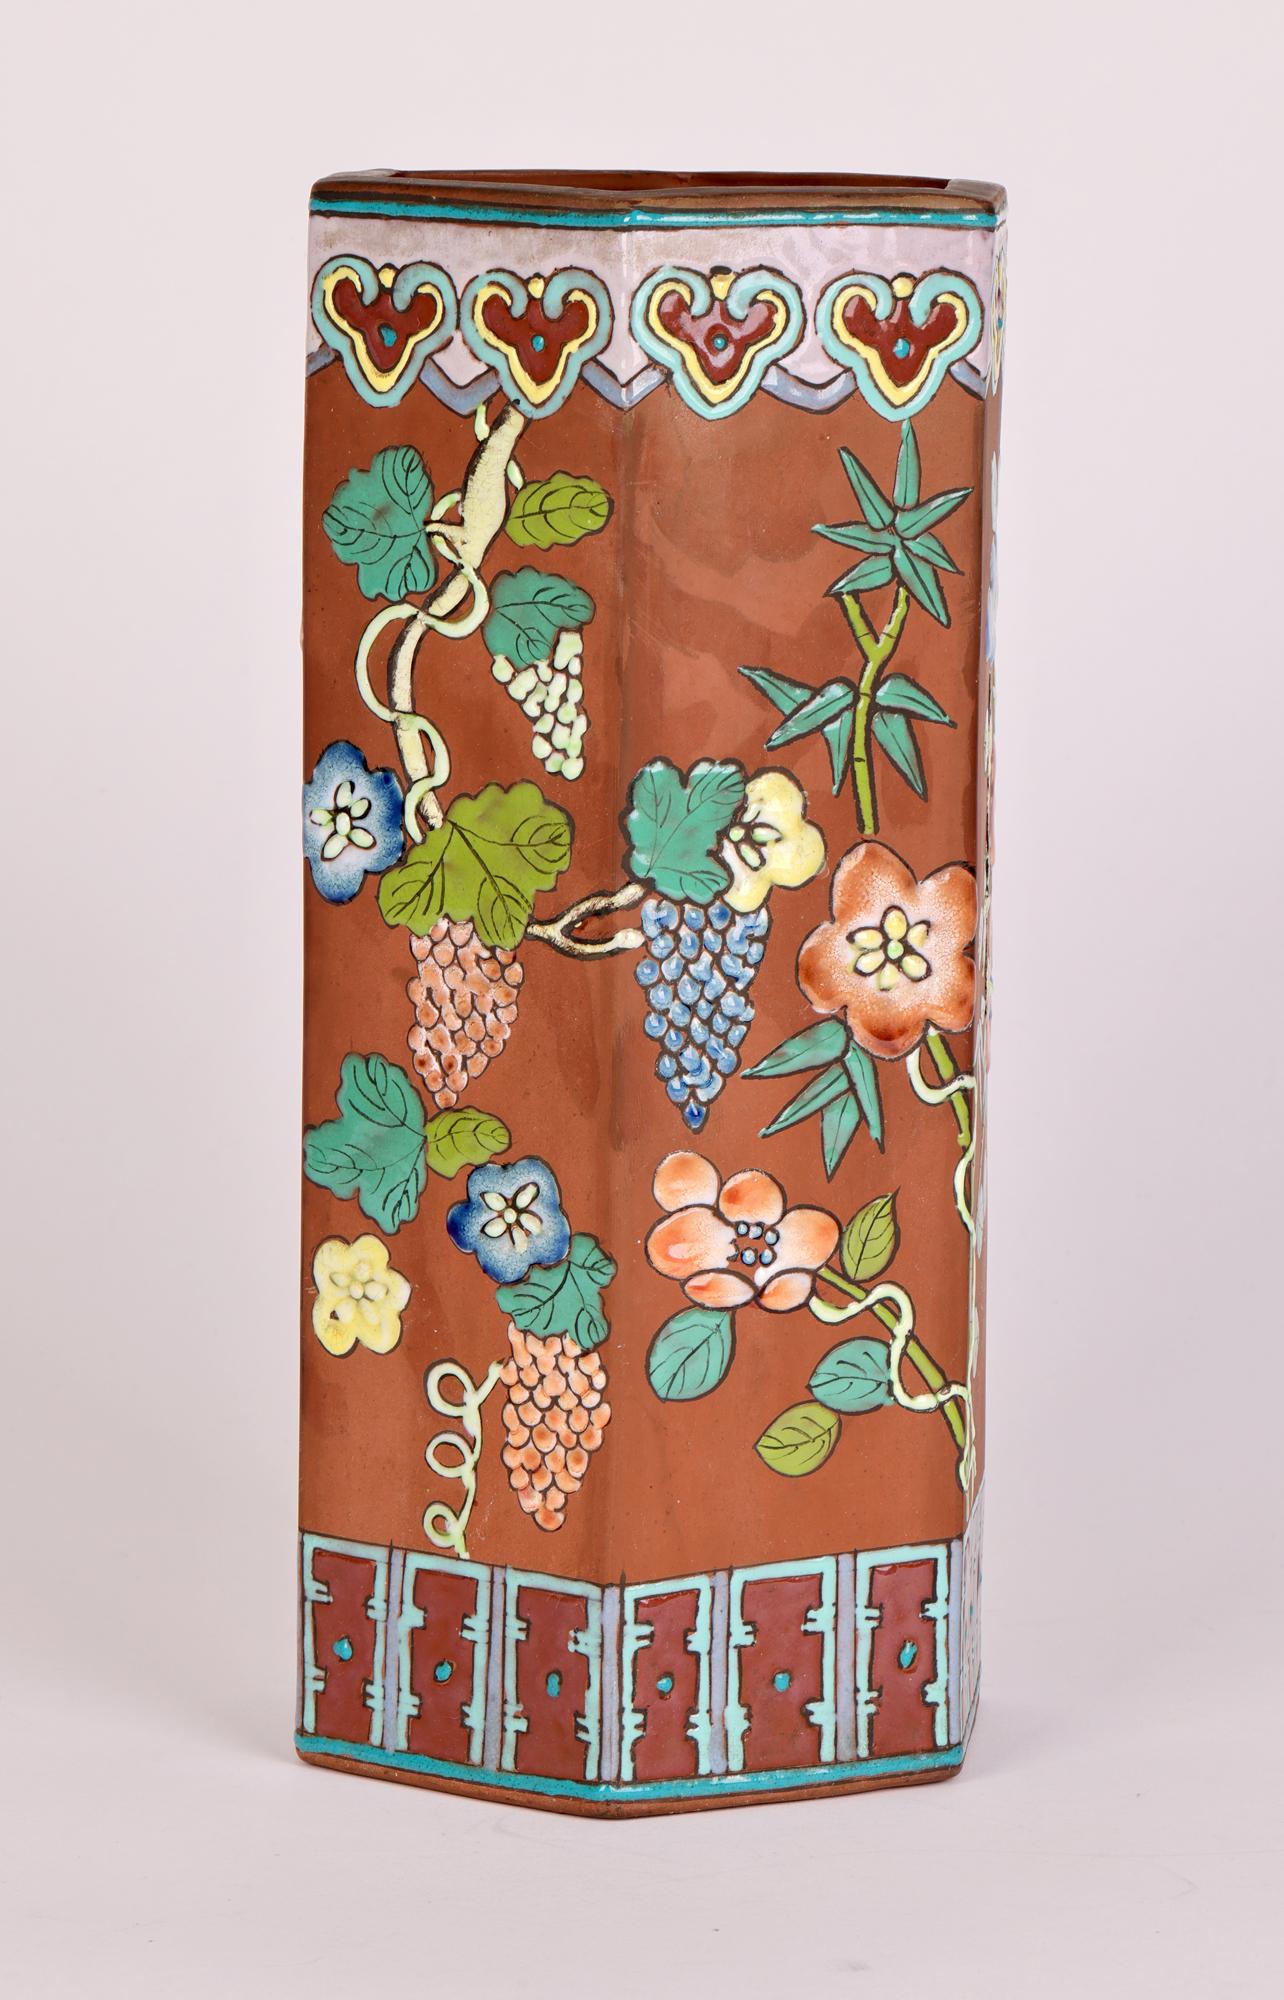 Chinese Yixing Hexagonal Vase with Painted Floral & Vine Designs For Sale 5